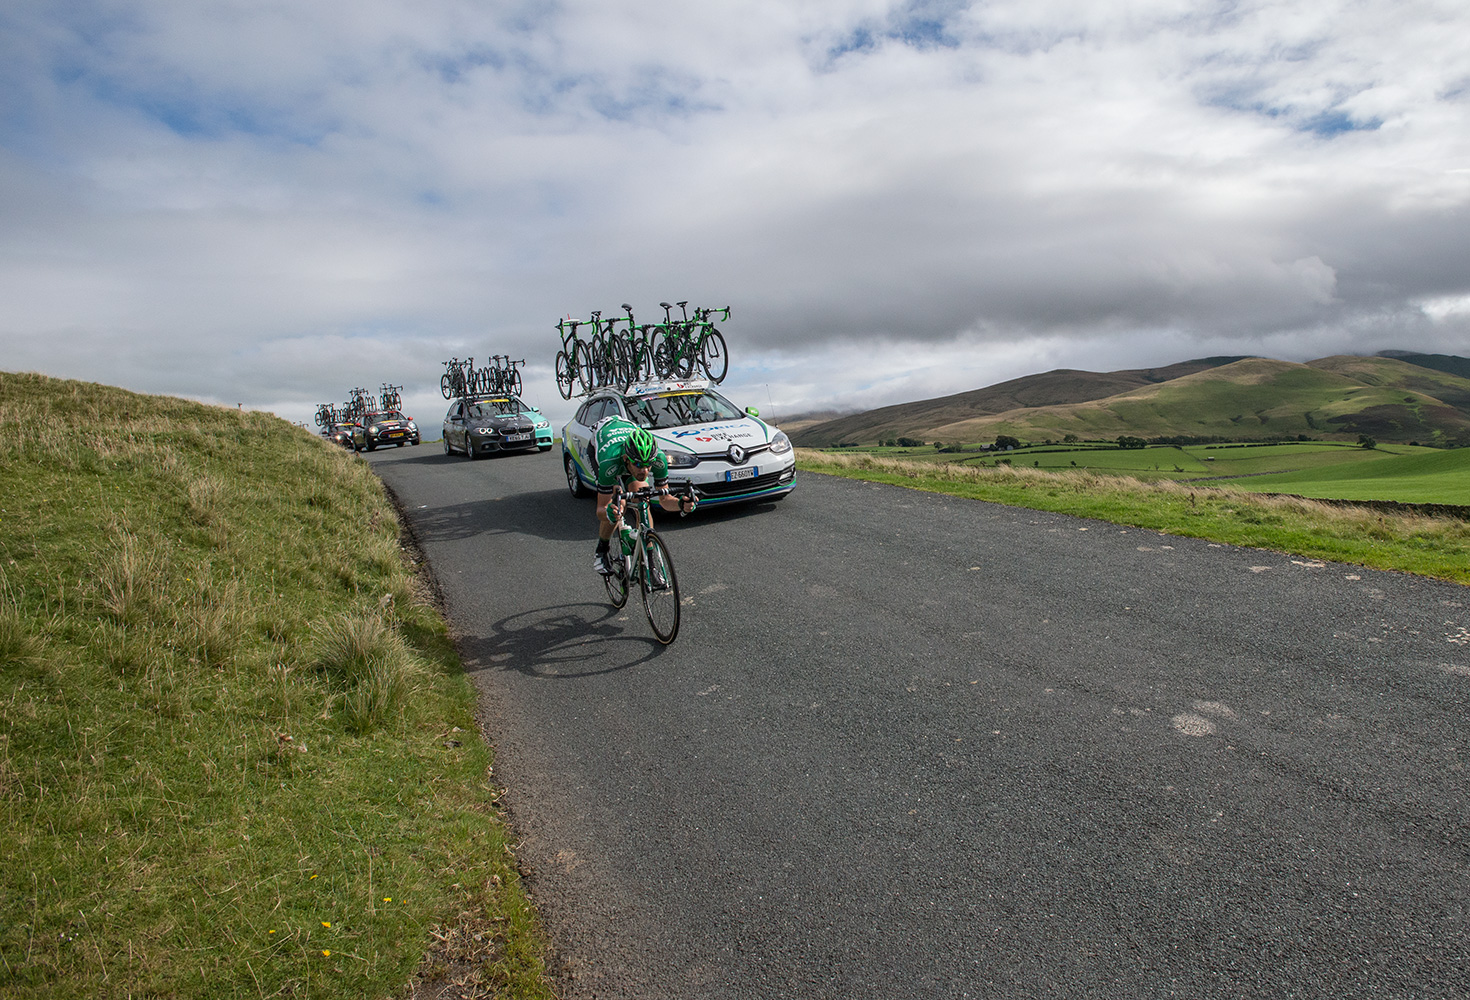  Domingos GONCALVES of Team Caja Rural on Caldbeck Commons in Cumbria during Stage 2